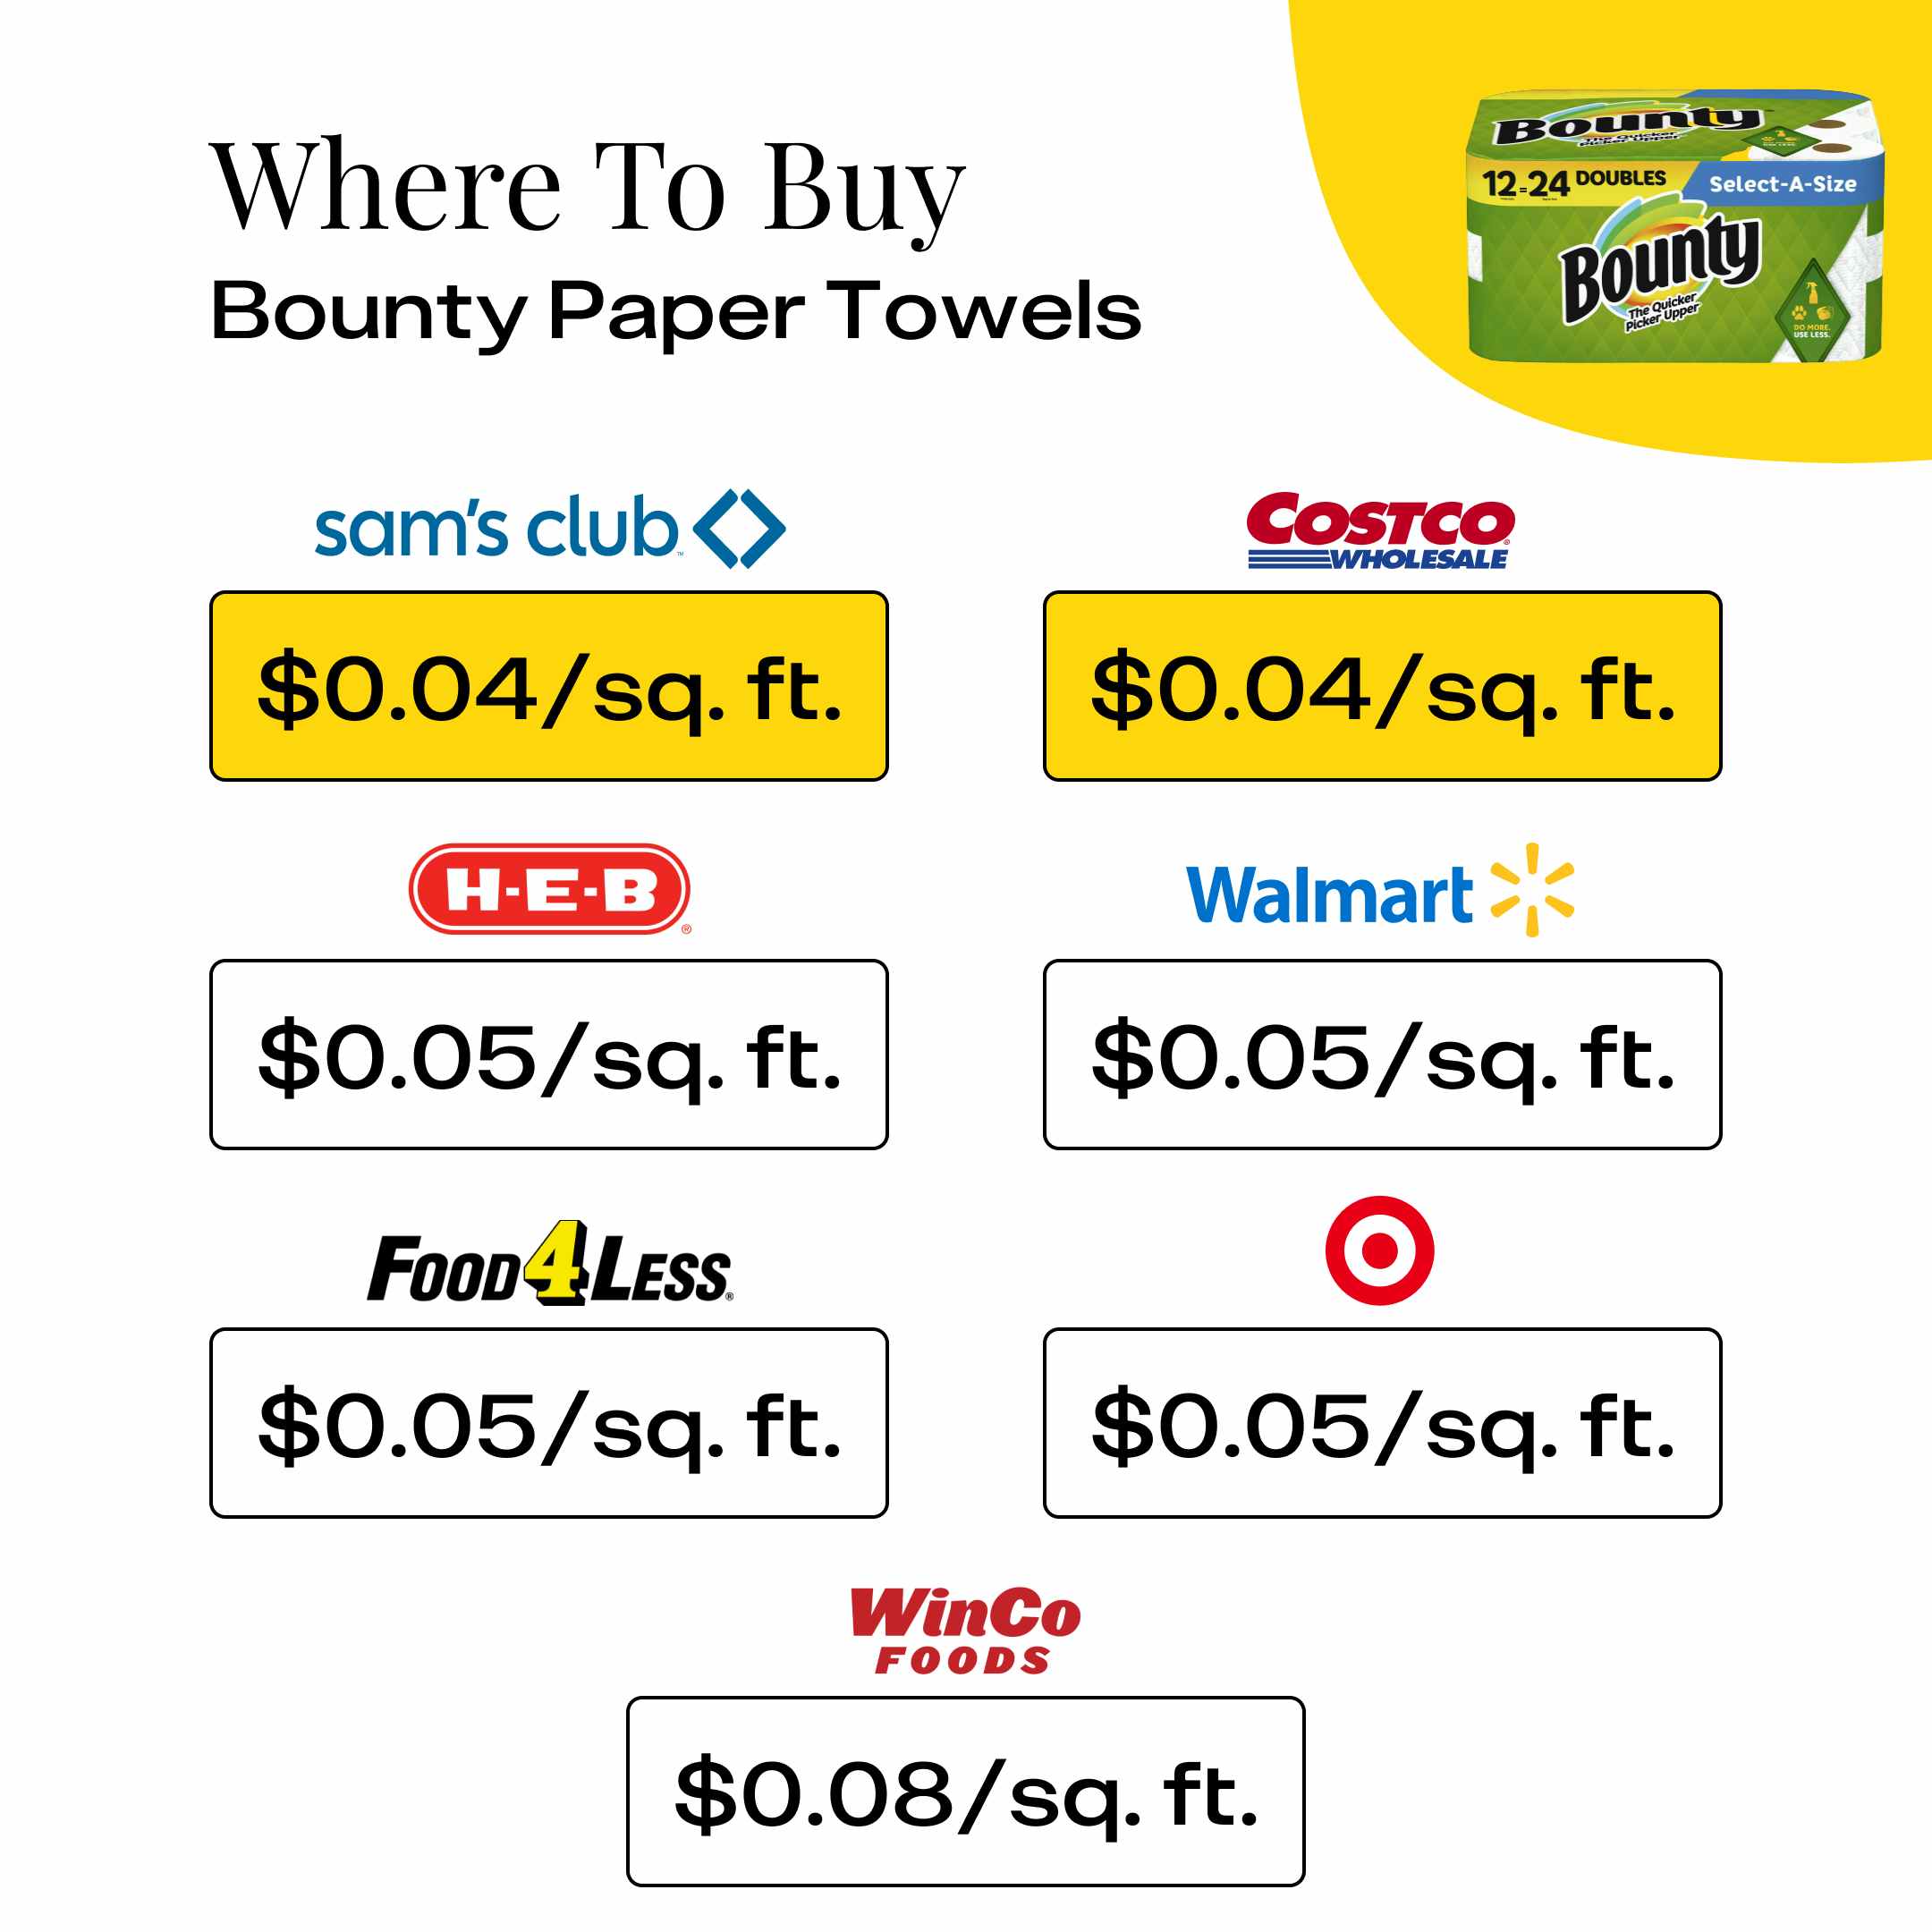 Where To Buy Bounty Paper Towels